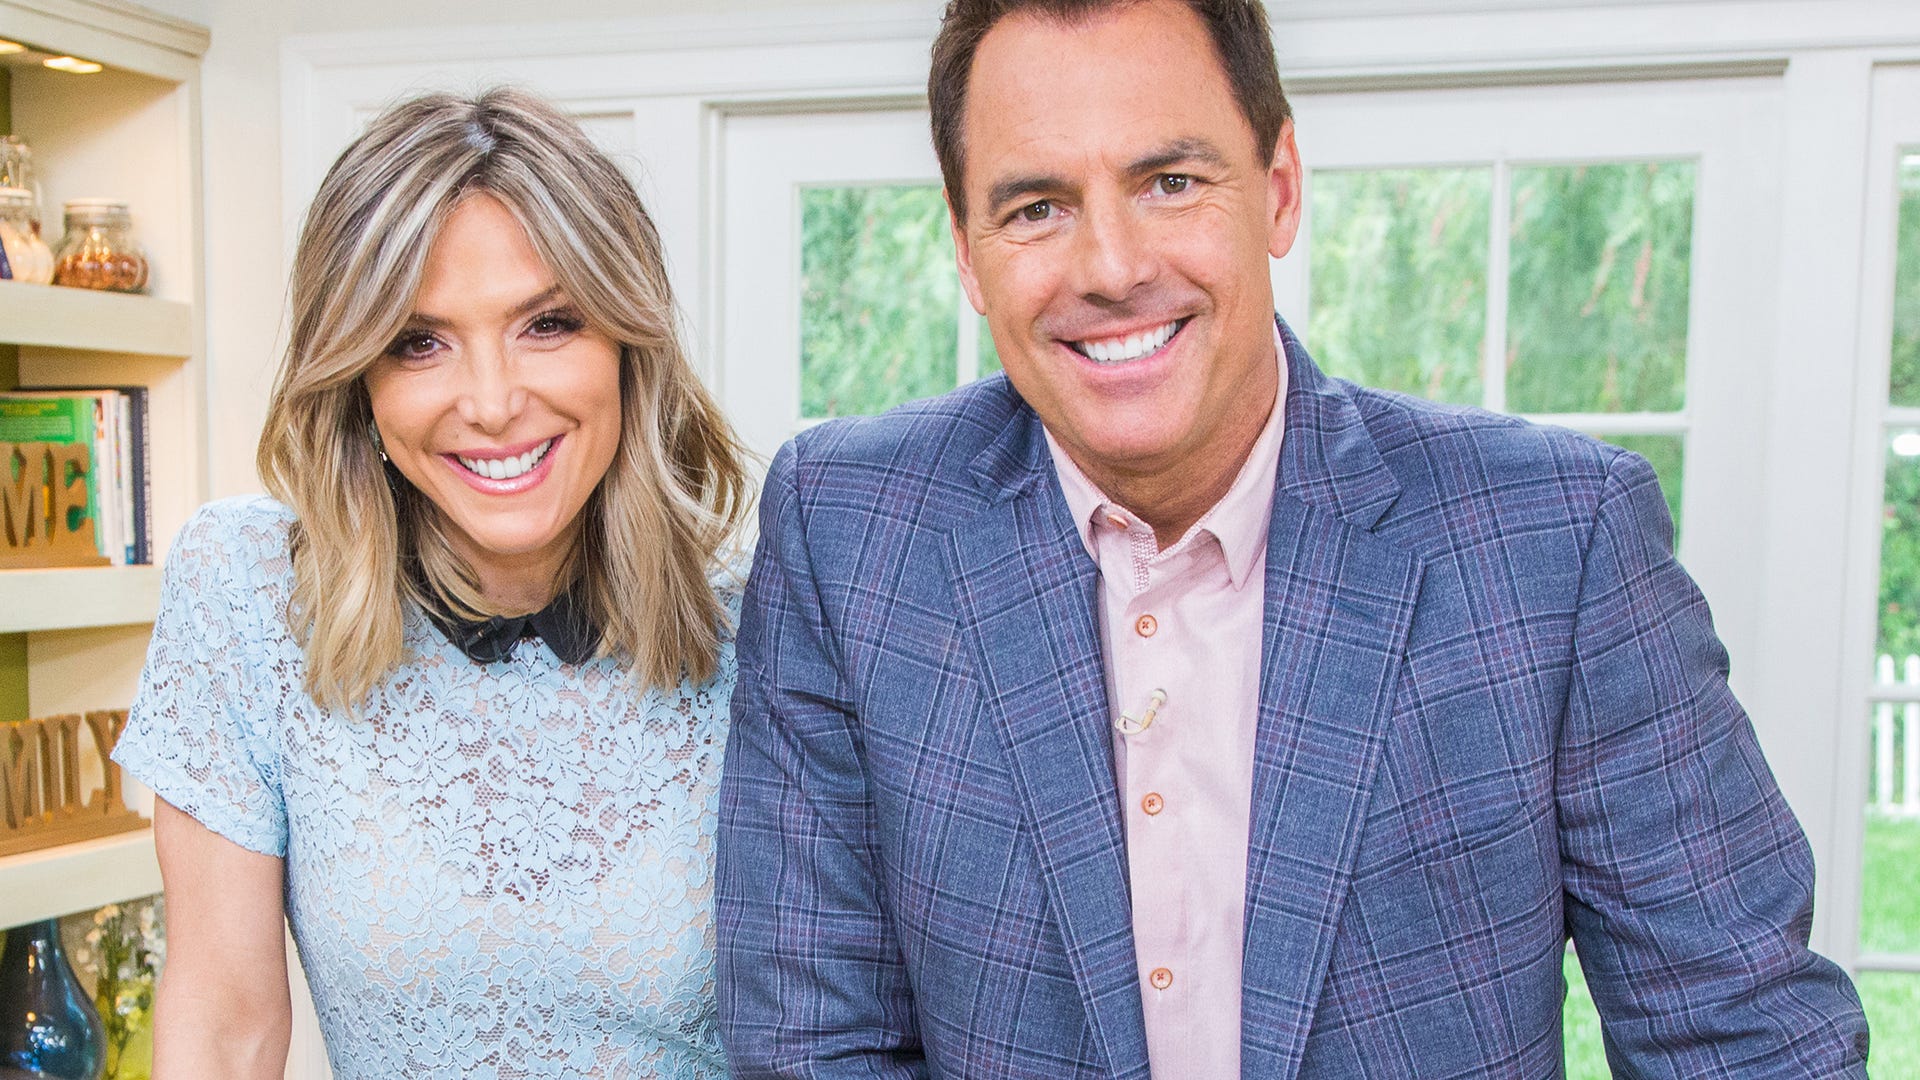 Debbie Matenopolous and Mark Steines, Home & Family​